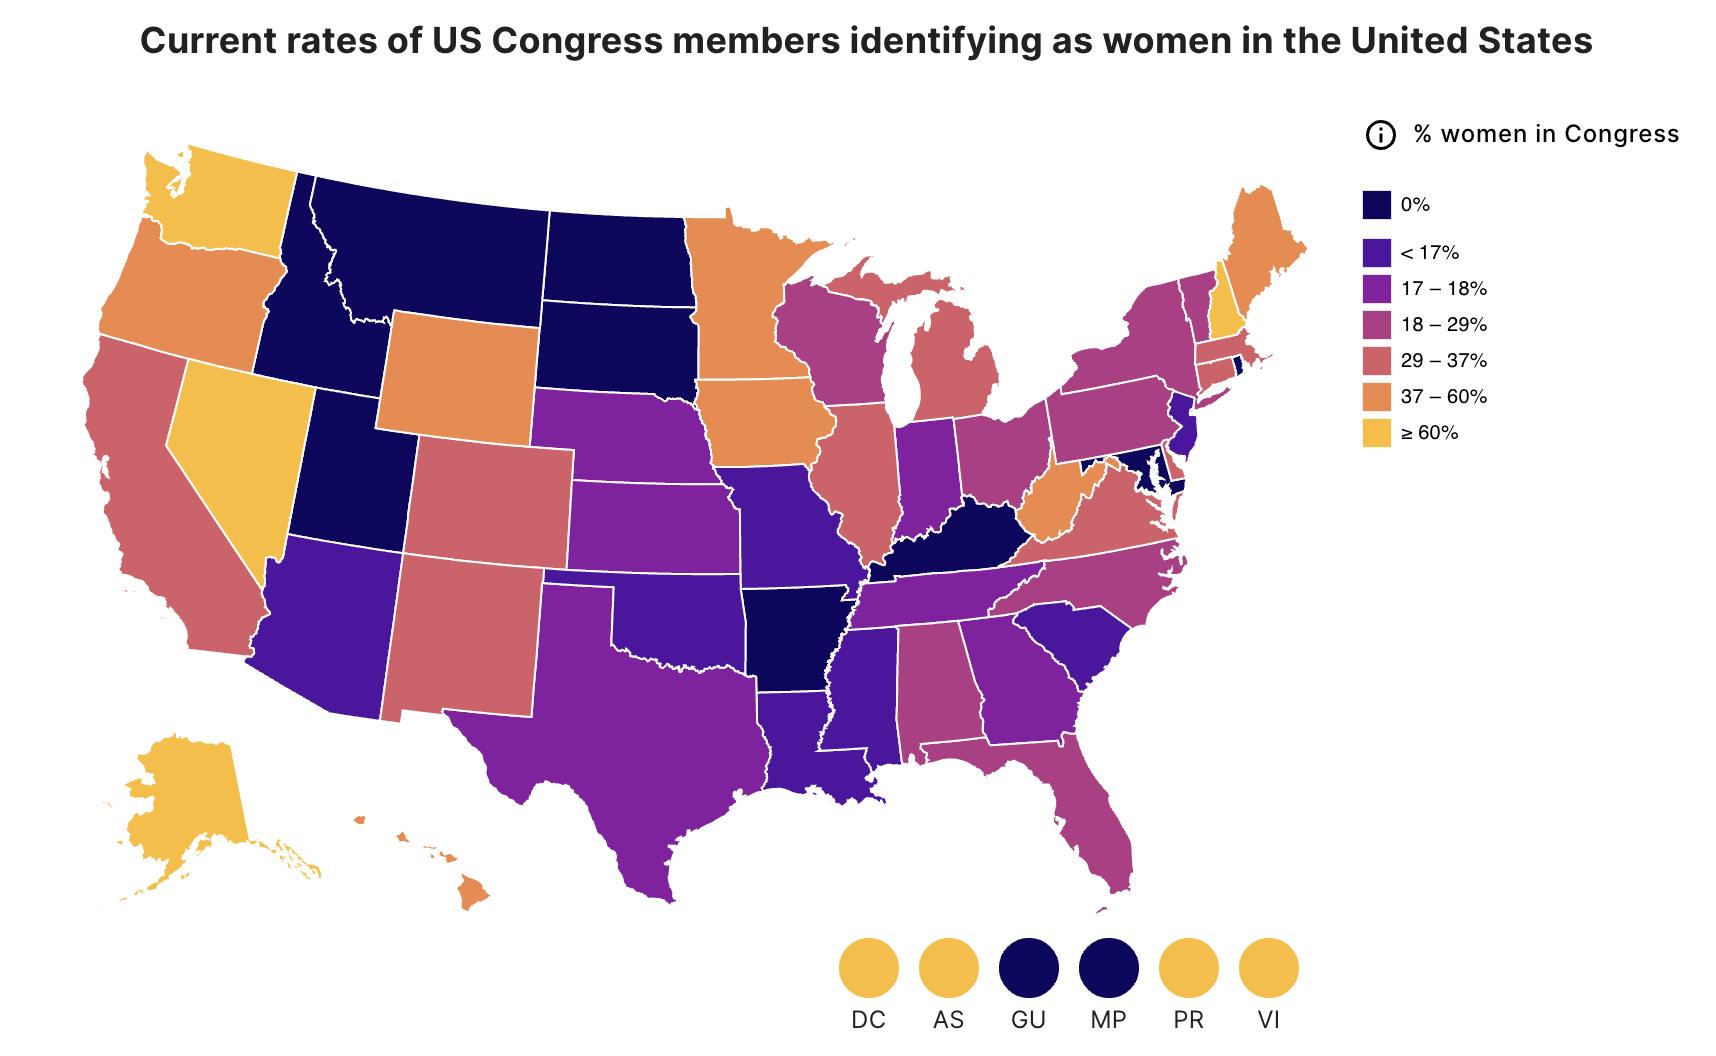 Map of the United States and territories from the Health Equity Tracker. Rates of women in US Congress by state are represented using color, which is inherently inaccessible to unsighted users.